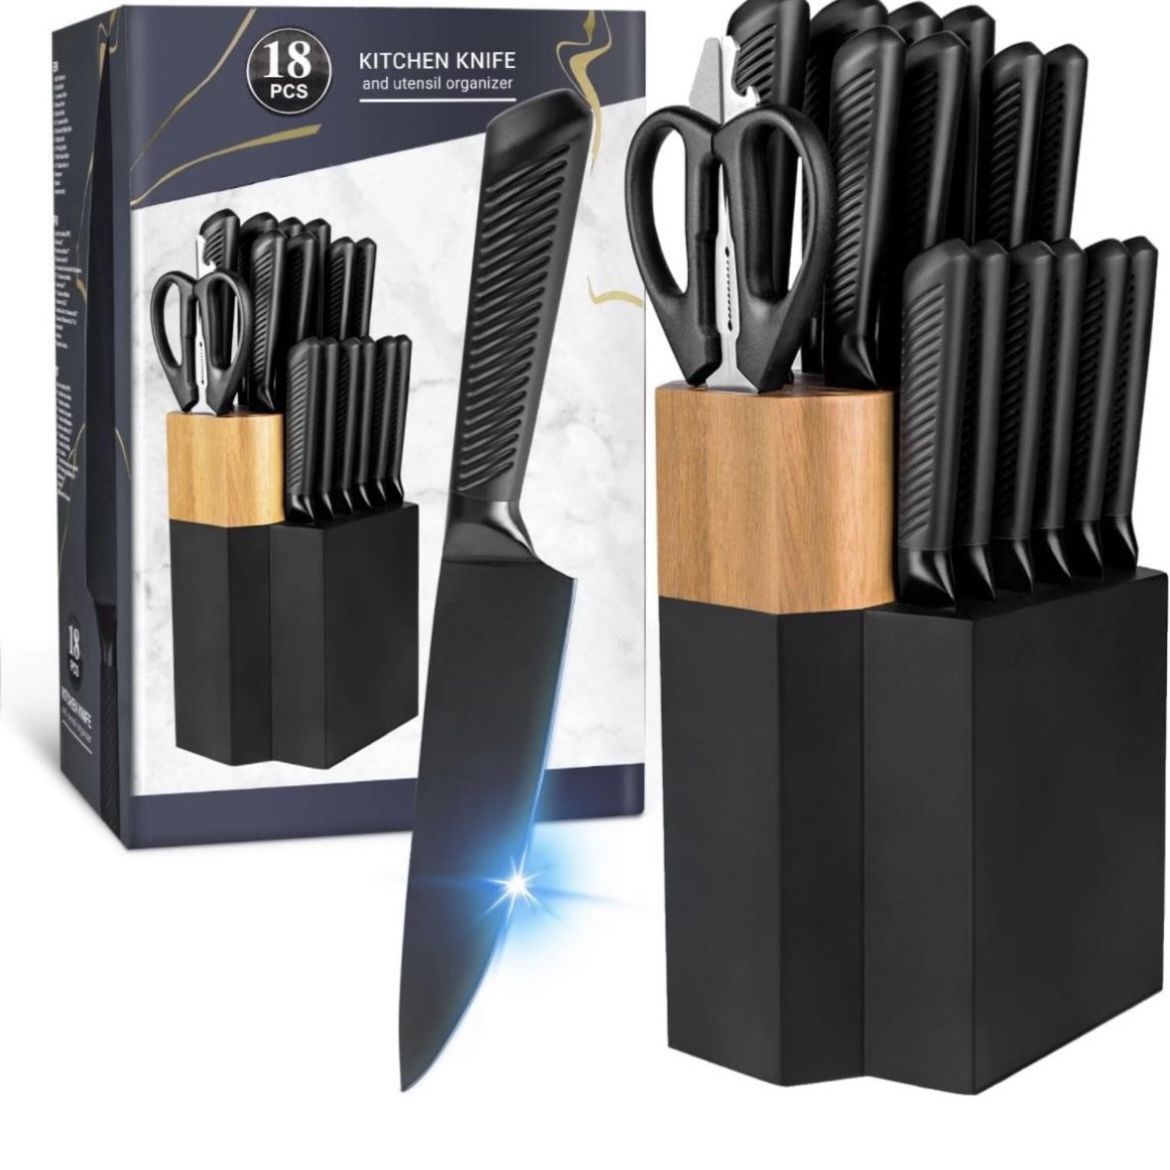 Knife Set,18 Pieces Kitchen Knife Set with Wooden Block,High